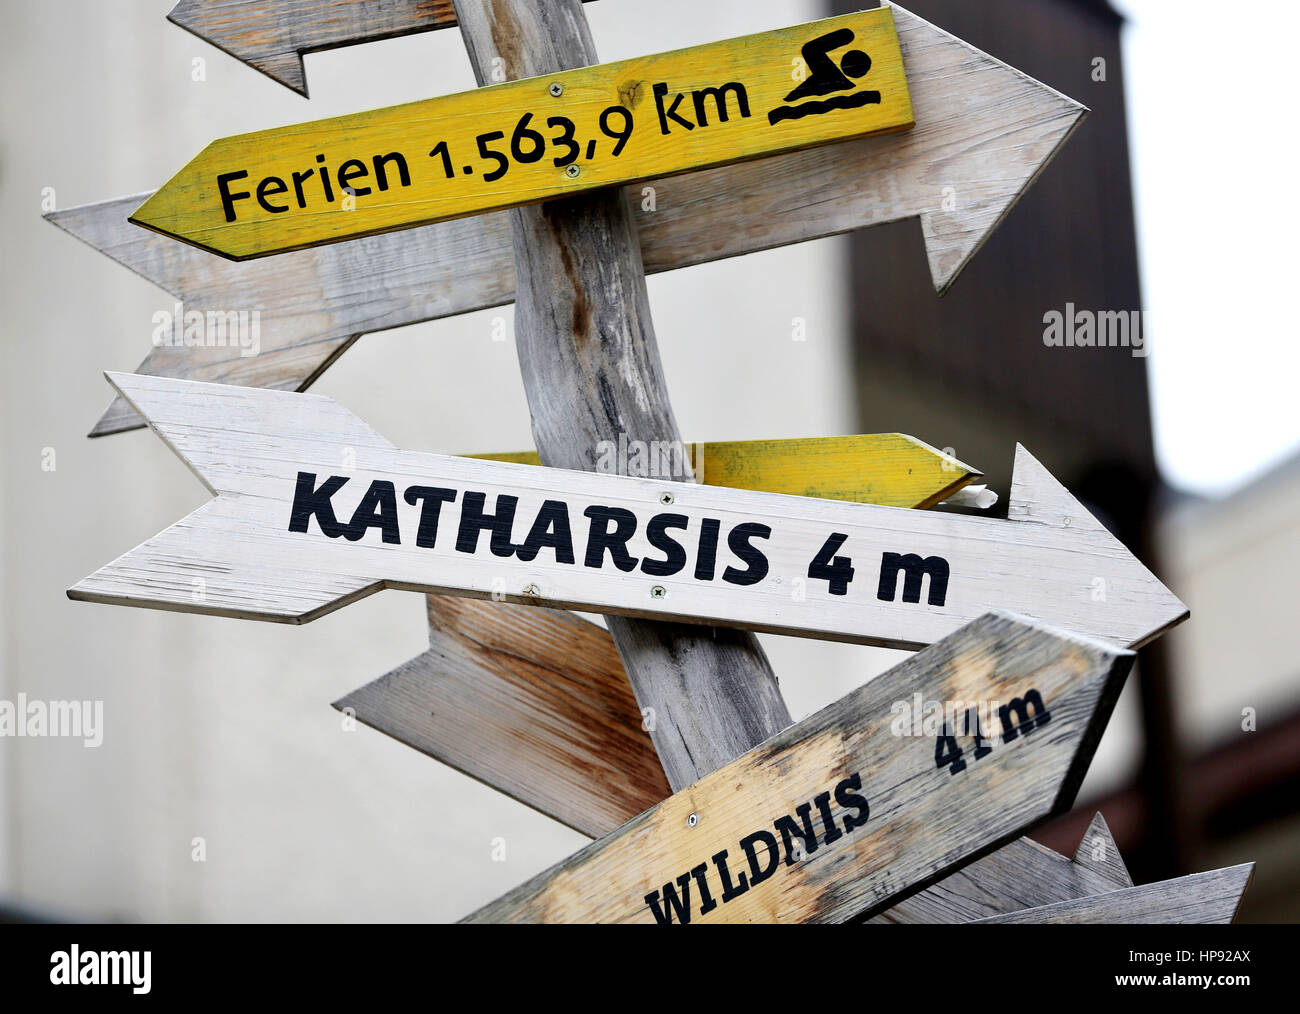 Leipzig, Germany. 20th Feb, 2017. A roadsign points towards 'Holidays' (1563, 9 km), catharsis (4 m) and Wilderness (41 m) in front of the 'Theater der Jungen Welt' in Leipzig, Germany, 20 February 2017. According to Aristoteles the spectator of the tragedy traverses through the feelings of lamentation and horror to the catharsis of the soul. The sign is inviting people to experience the process at the 'Theater der Jungen Welt'. Photo: Jan Woitas/dpa-Zentralbild/dpa/Alamy Live News Stock Photo